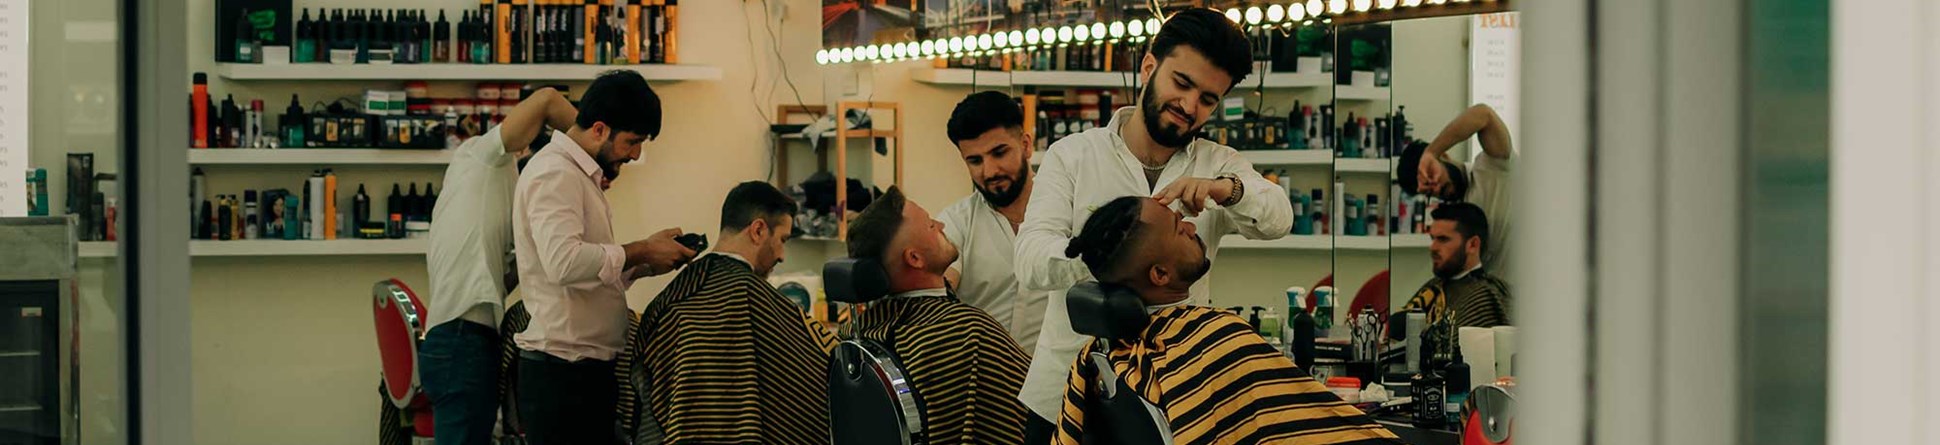 Men having shaves and their hair cut in a barbershop.